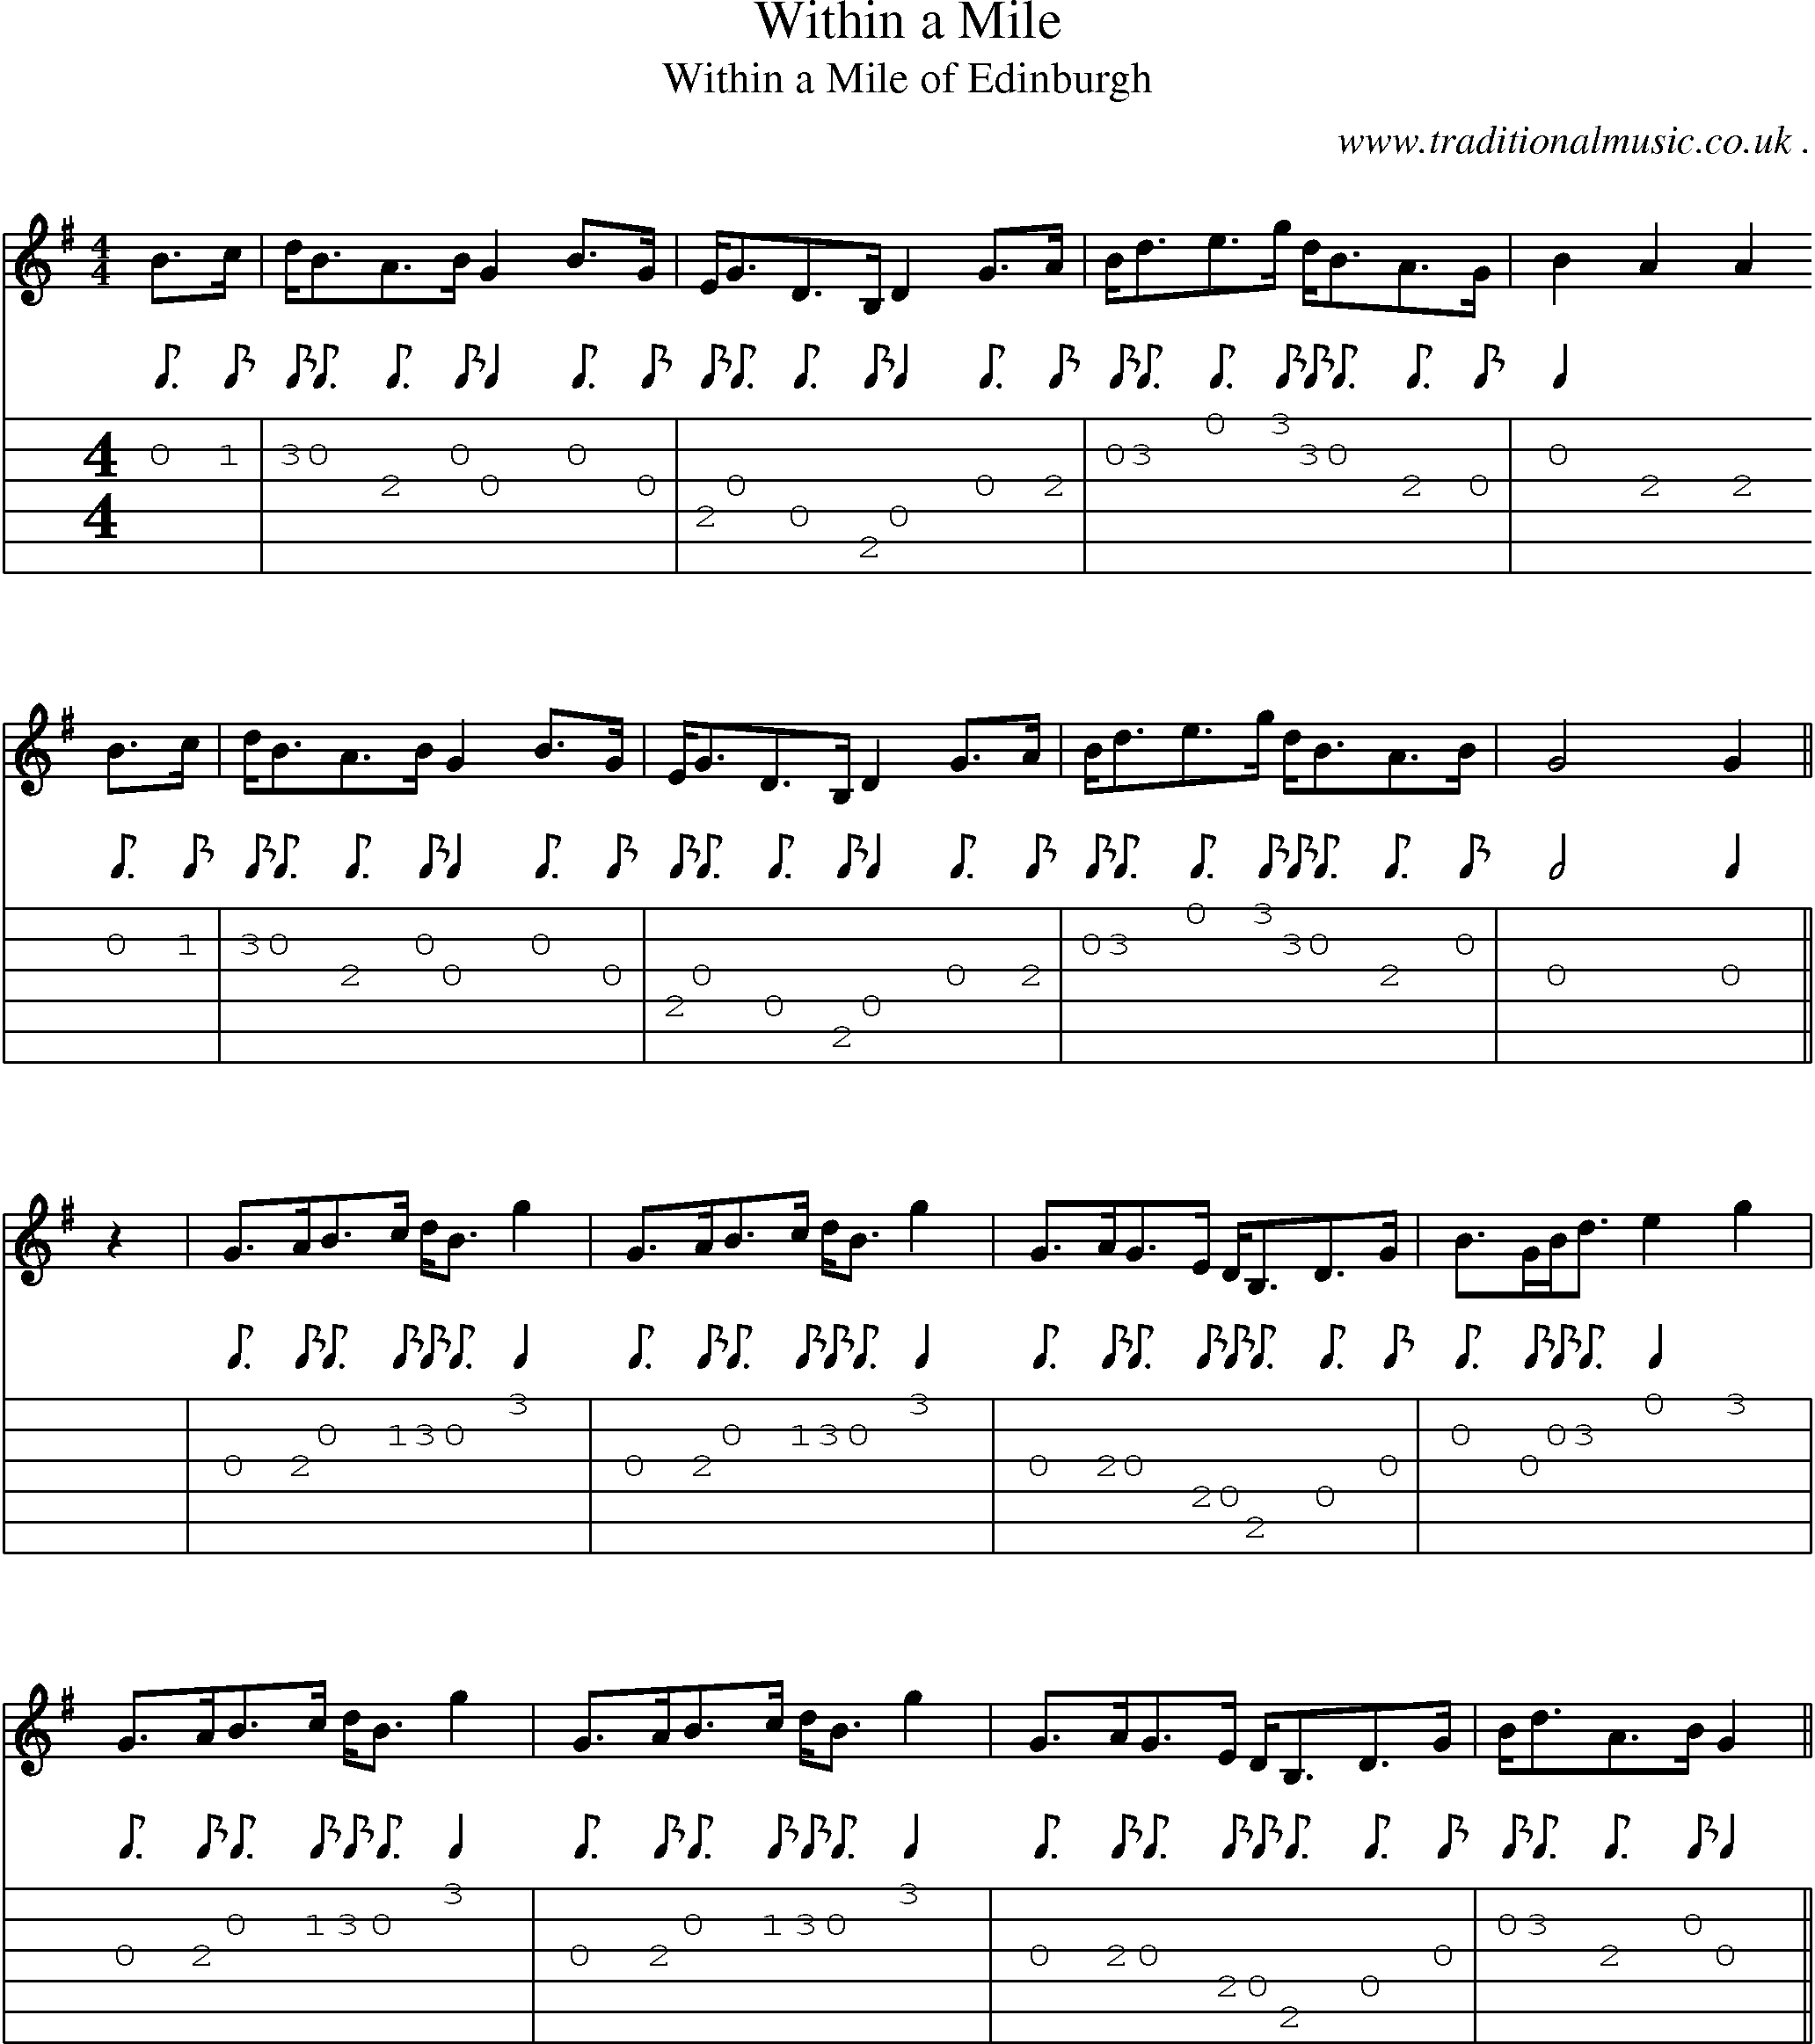 Sheet-music  score, Chords and Guitar Tabs for Within A Mile